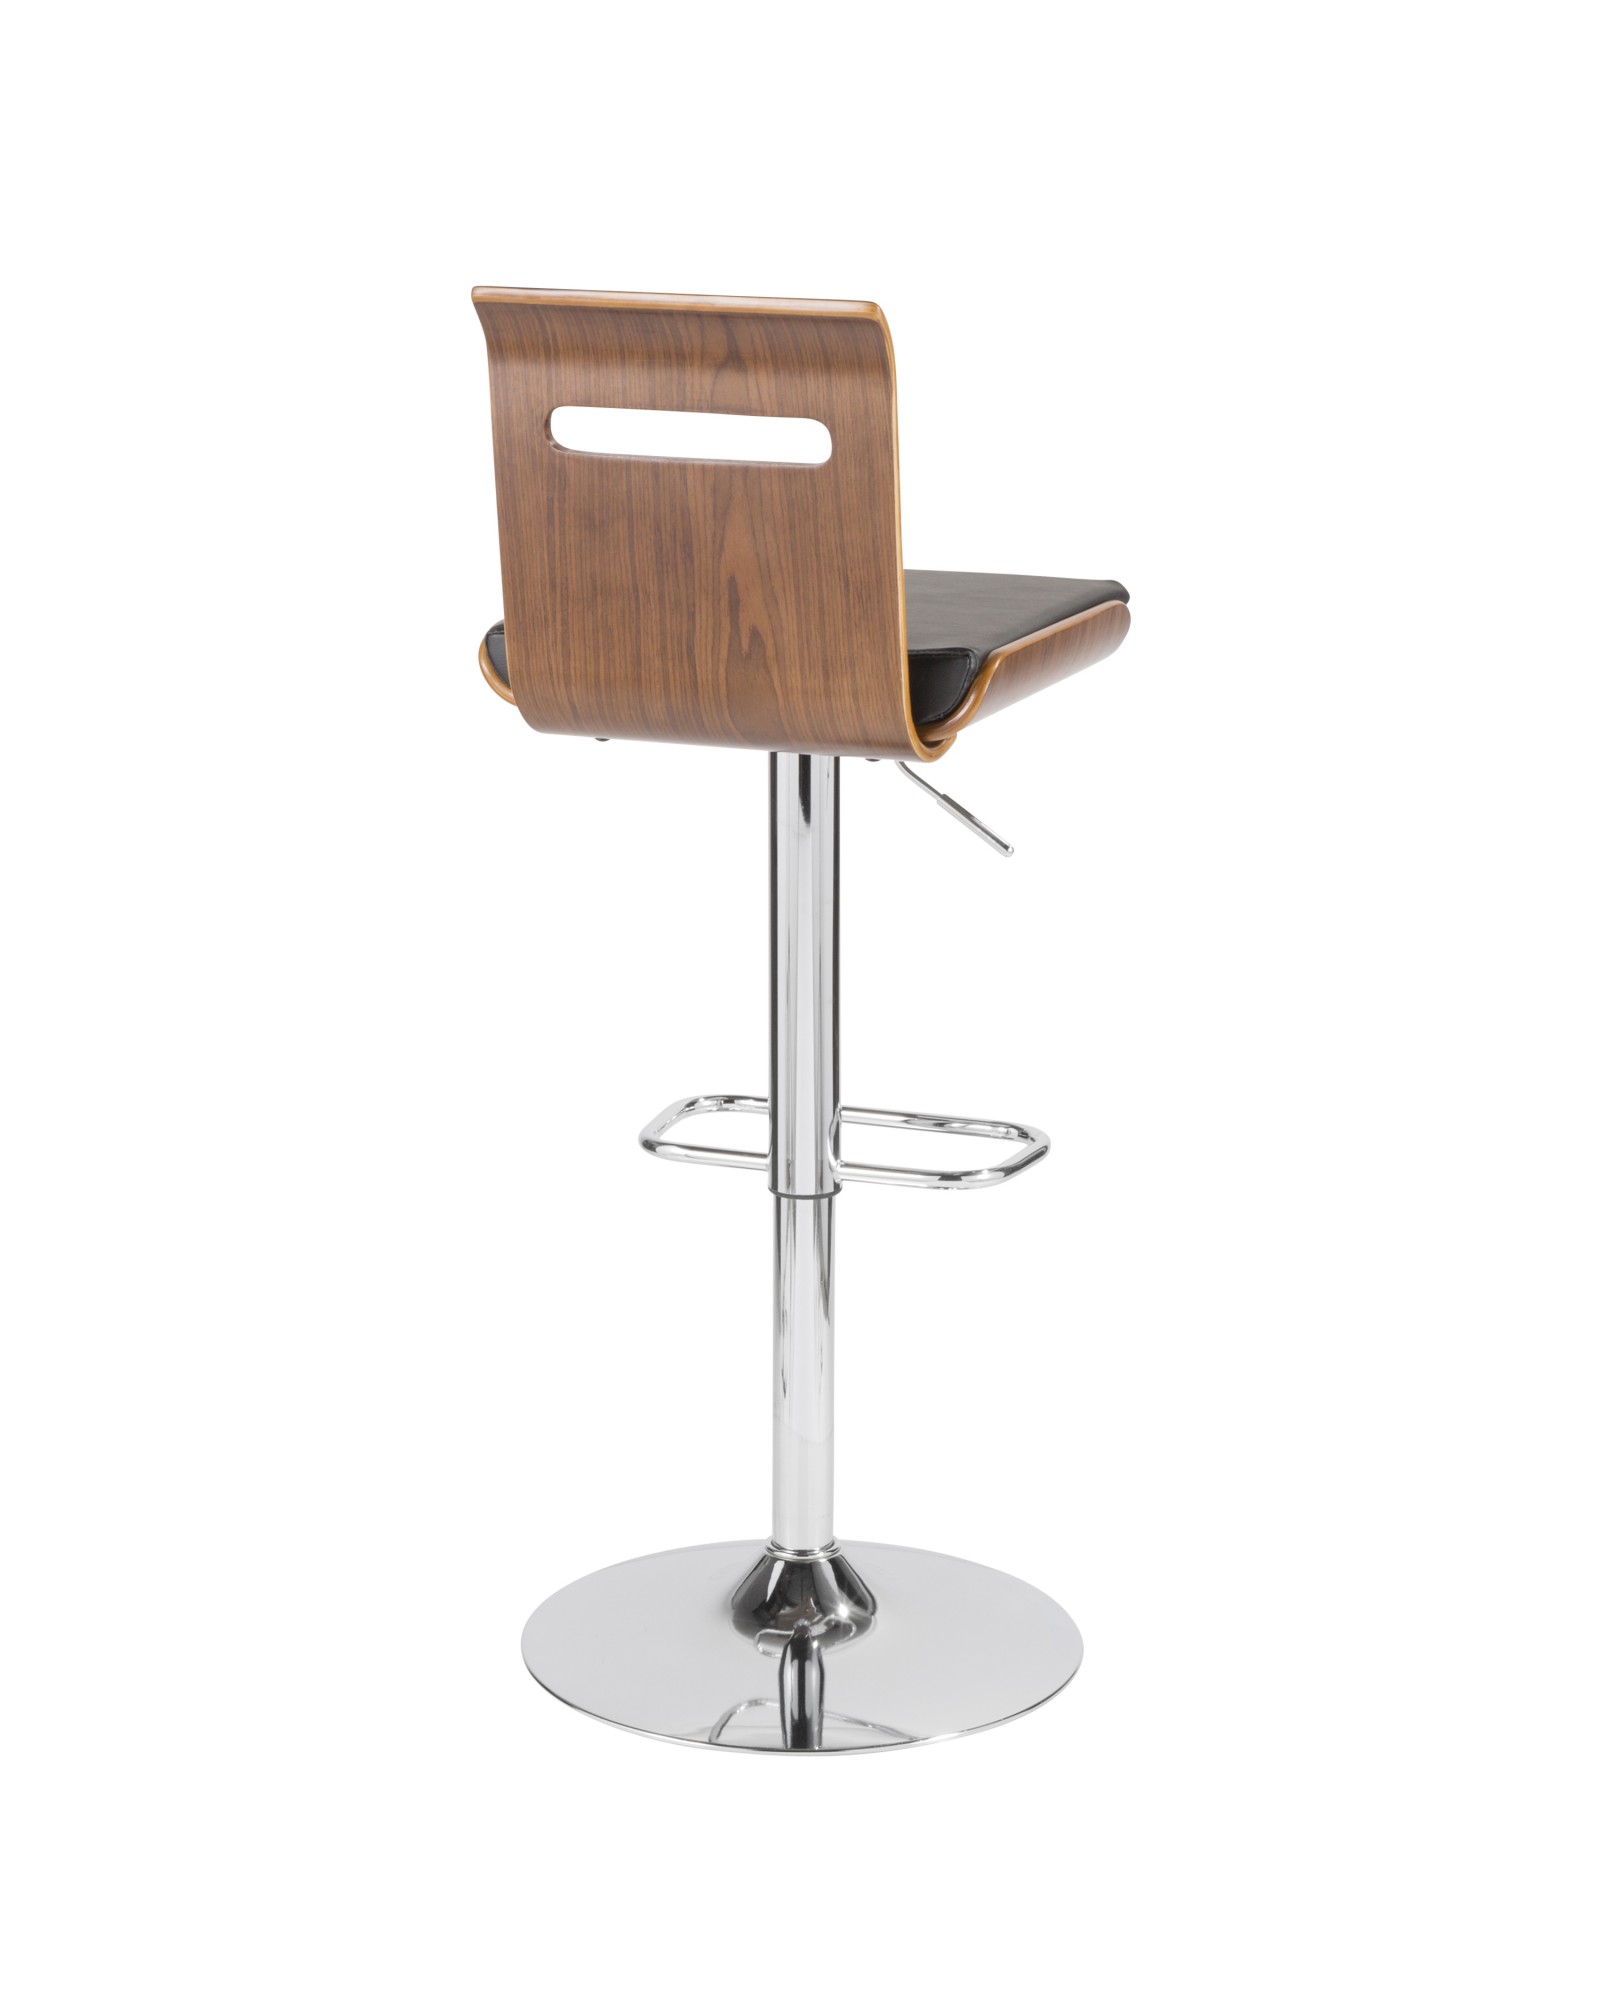 Viera Mid-Century Modern Adjustable Barstool with Swivel in Walnut and Black Faux Leather